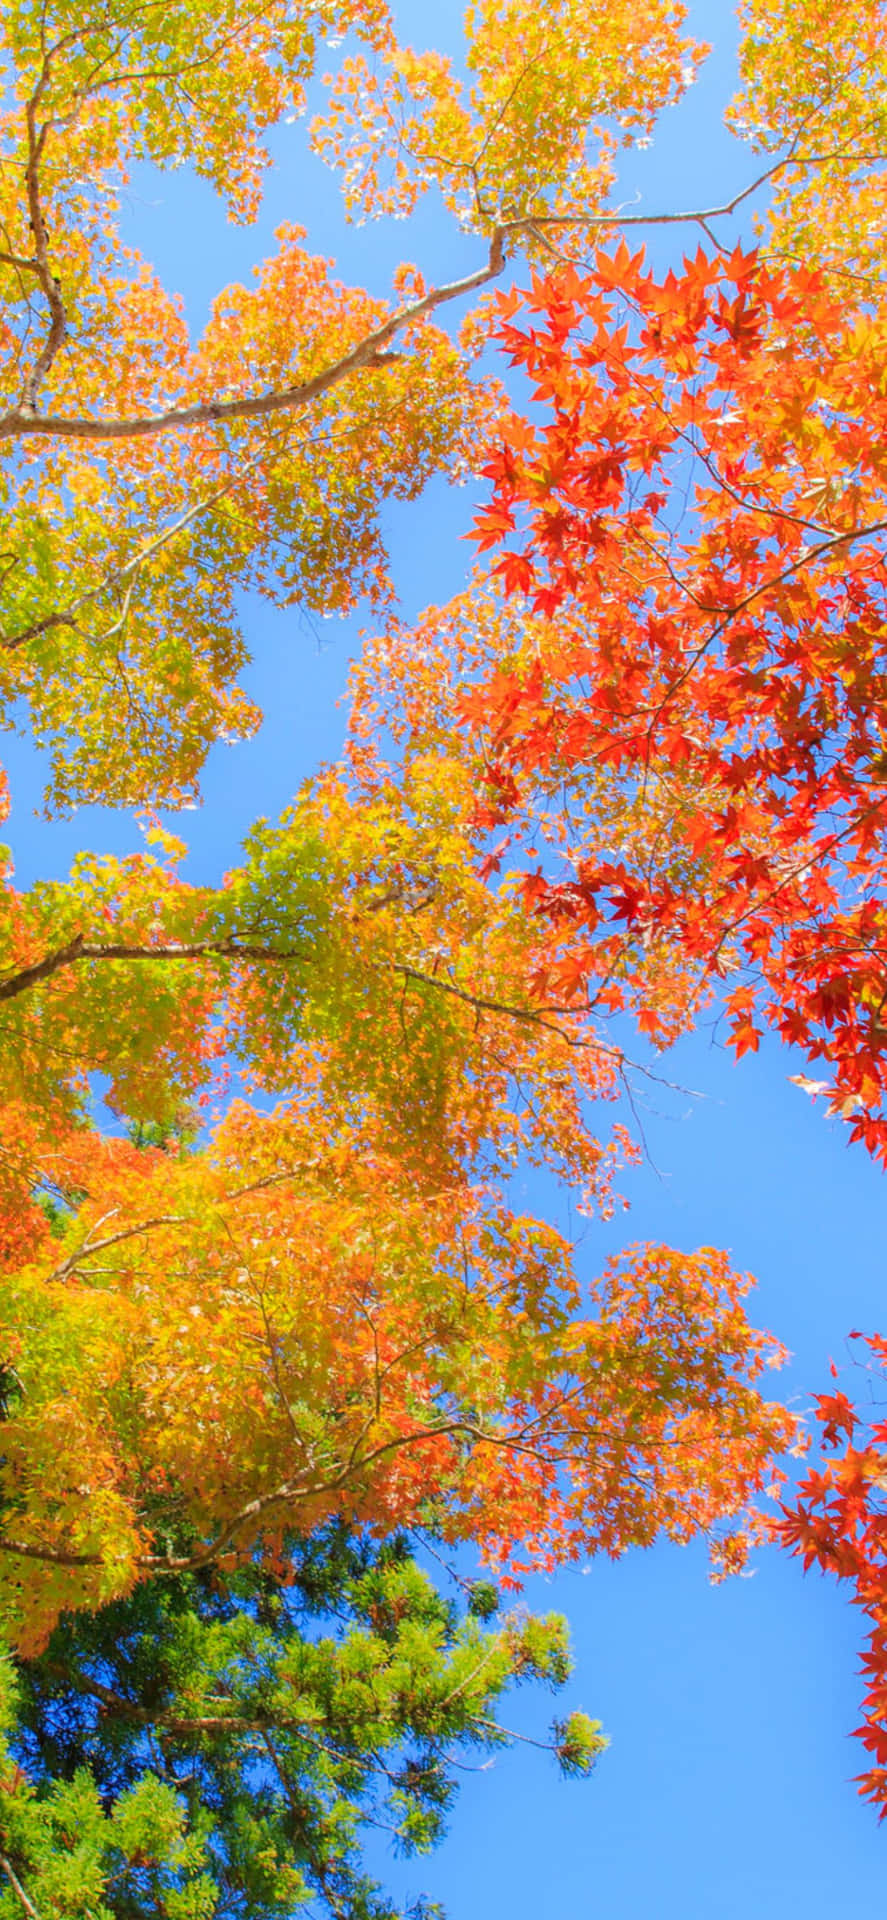 Bright autumn colors paint the iPhone Xs Max background